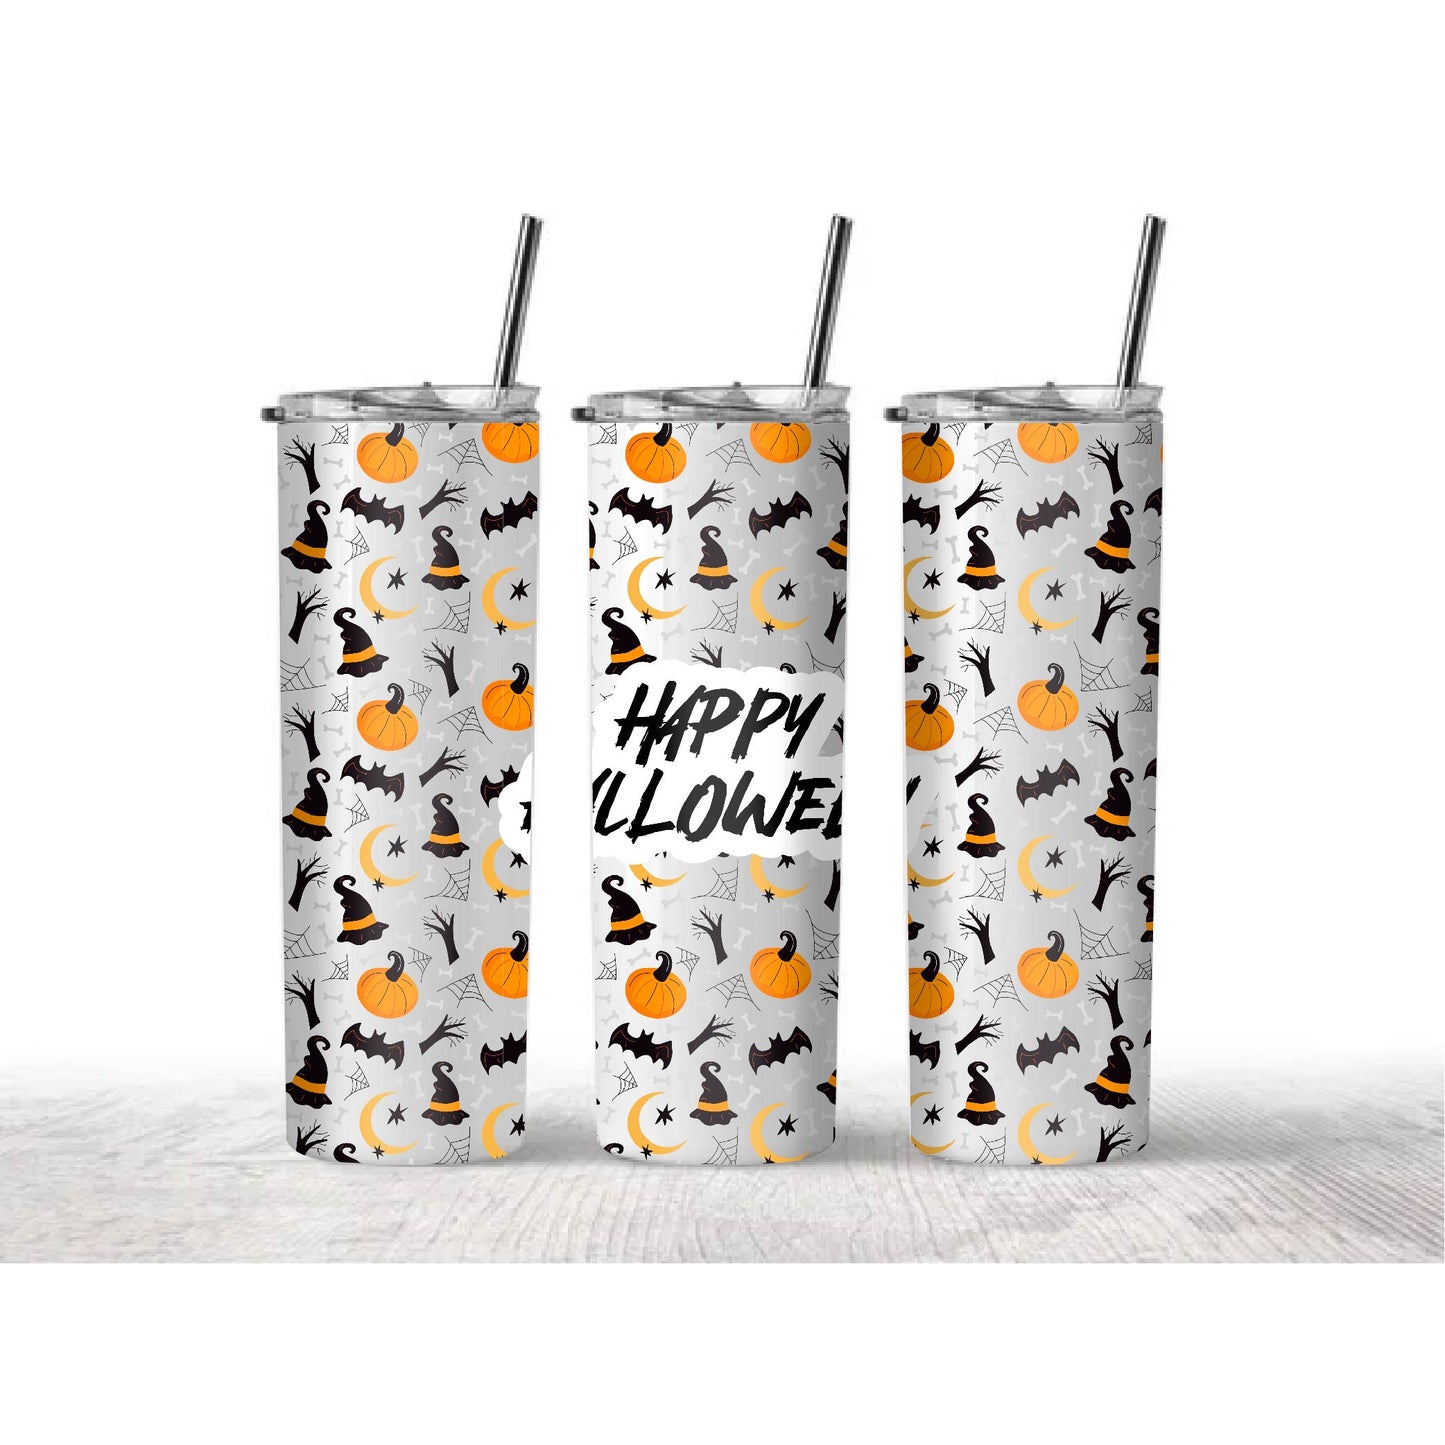 Halloween wrap only PNG, Happy Halloween PNG, spooky PNG, murcielagos PNG, ghosts PNG, ghosts PNG